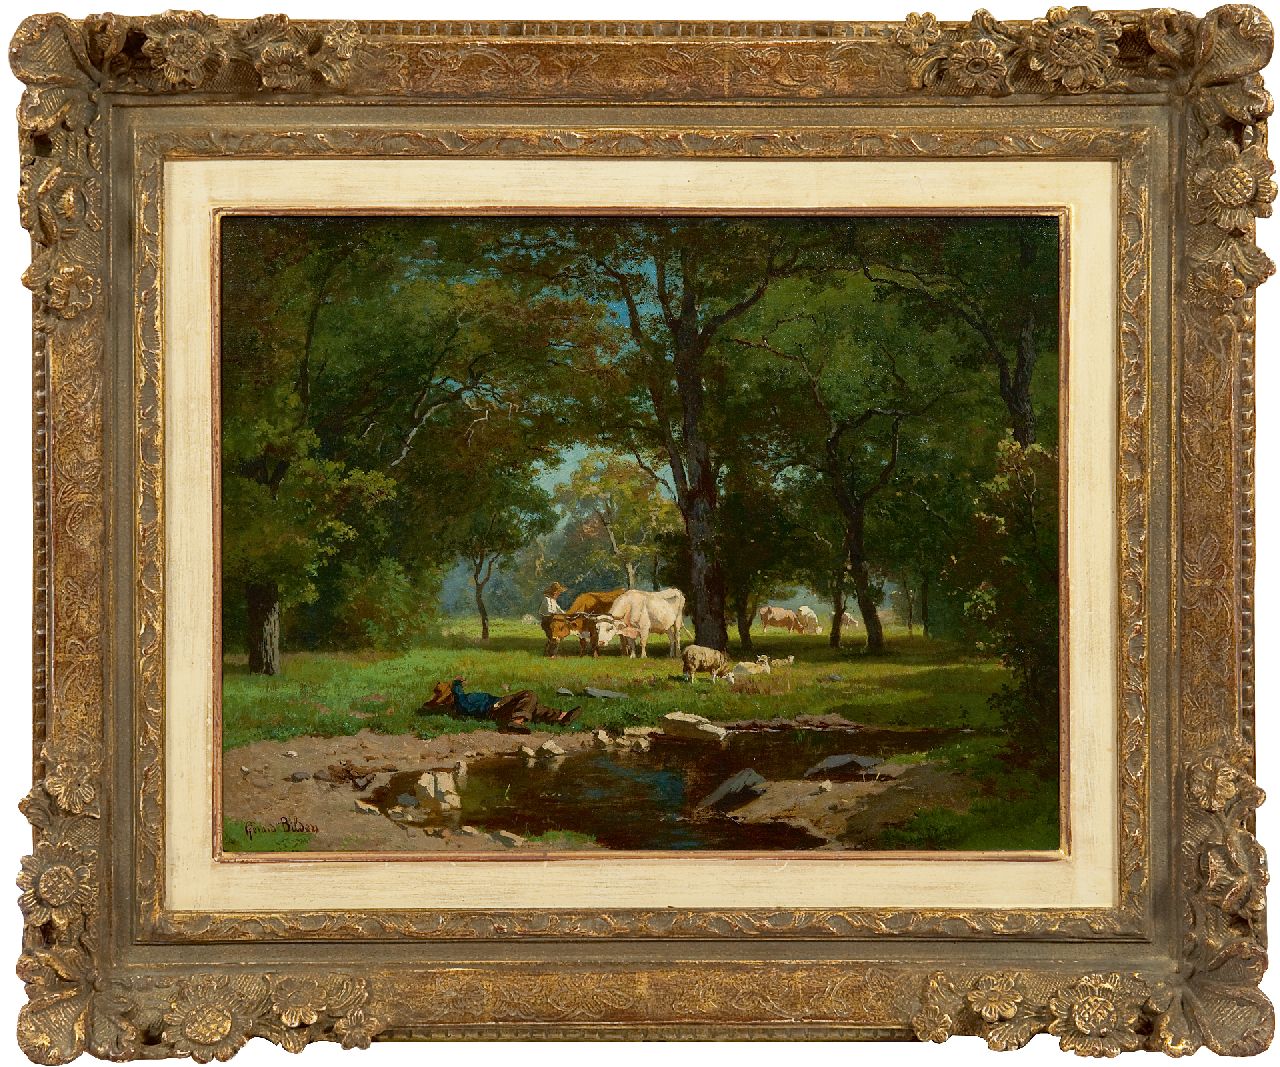 Bilders A.G.  | Albertus Gerardus 'Gerard' Bilders, Cowherds and cattle in a forest, oil on canvas 31.0 x 41.2 cm, signed l.l. and painted early 1860's